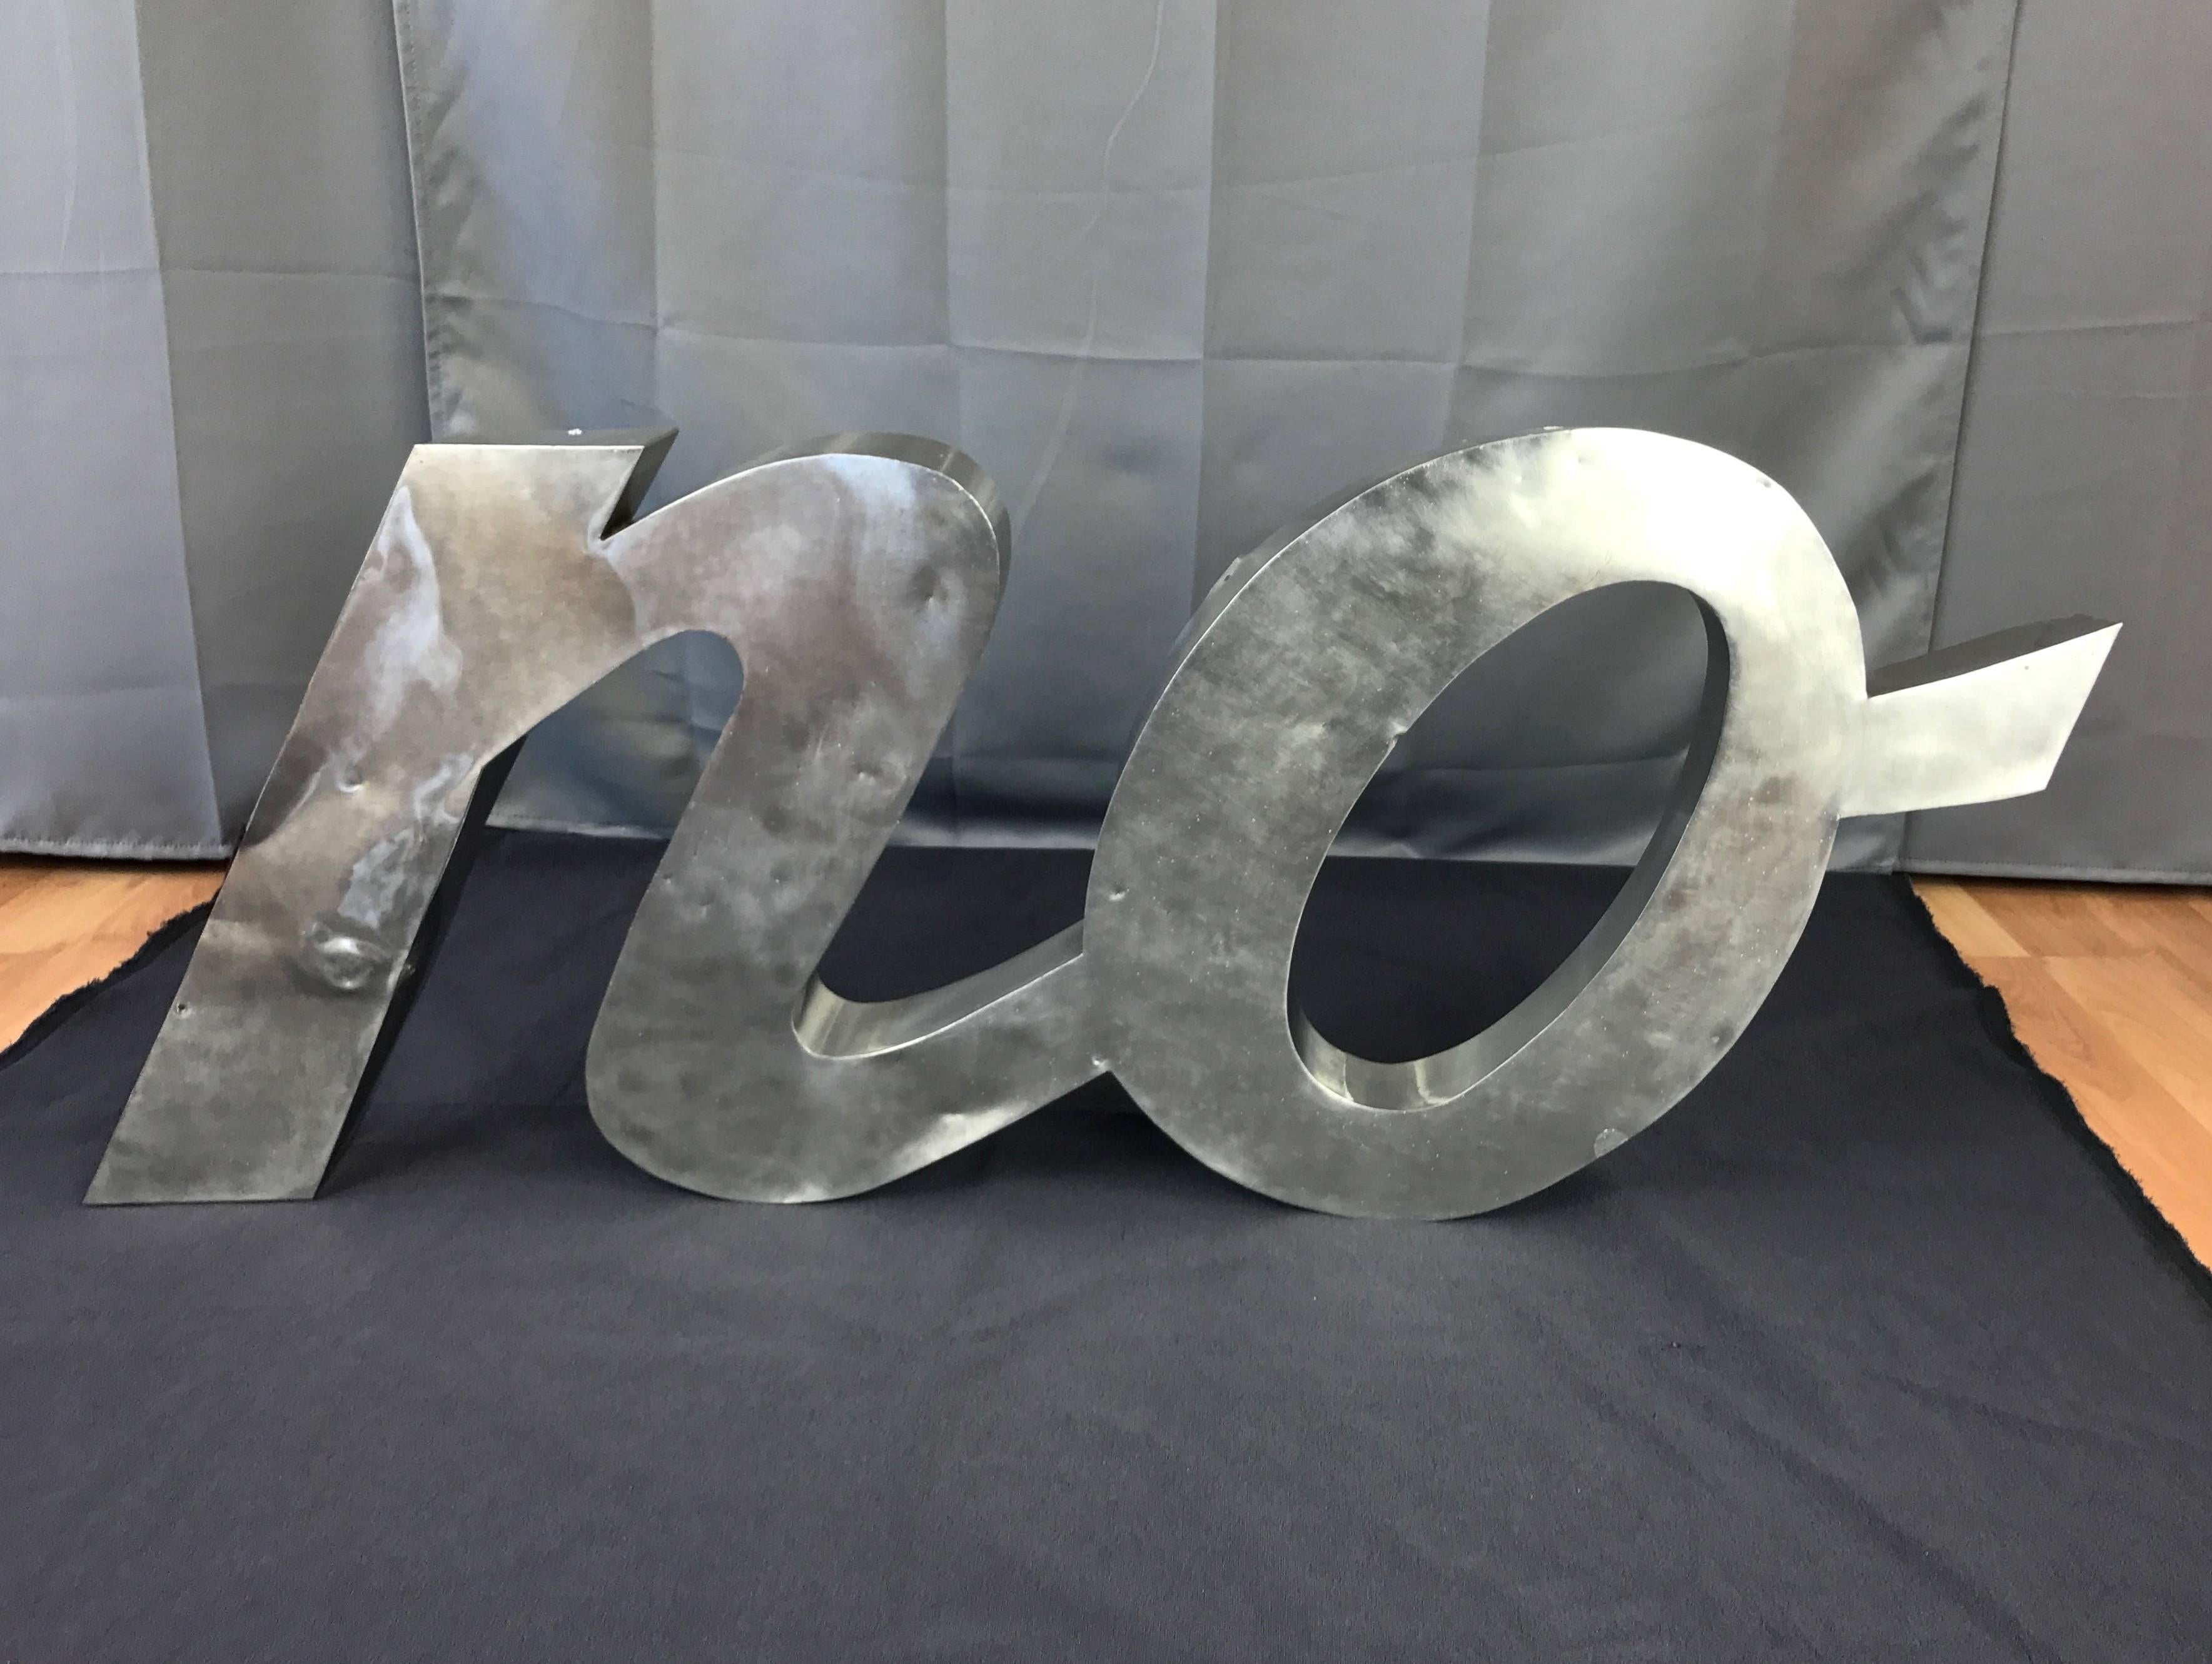 A circa 1950s large three-dimensional steel “NO” sign that will have you saying “YES!”

Typography of the lower case cursive letters has a very stylish mid-century flair. Steel is unfinished, with a combination of shaped and welded edges. Displays a